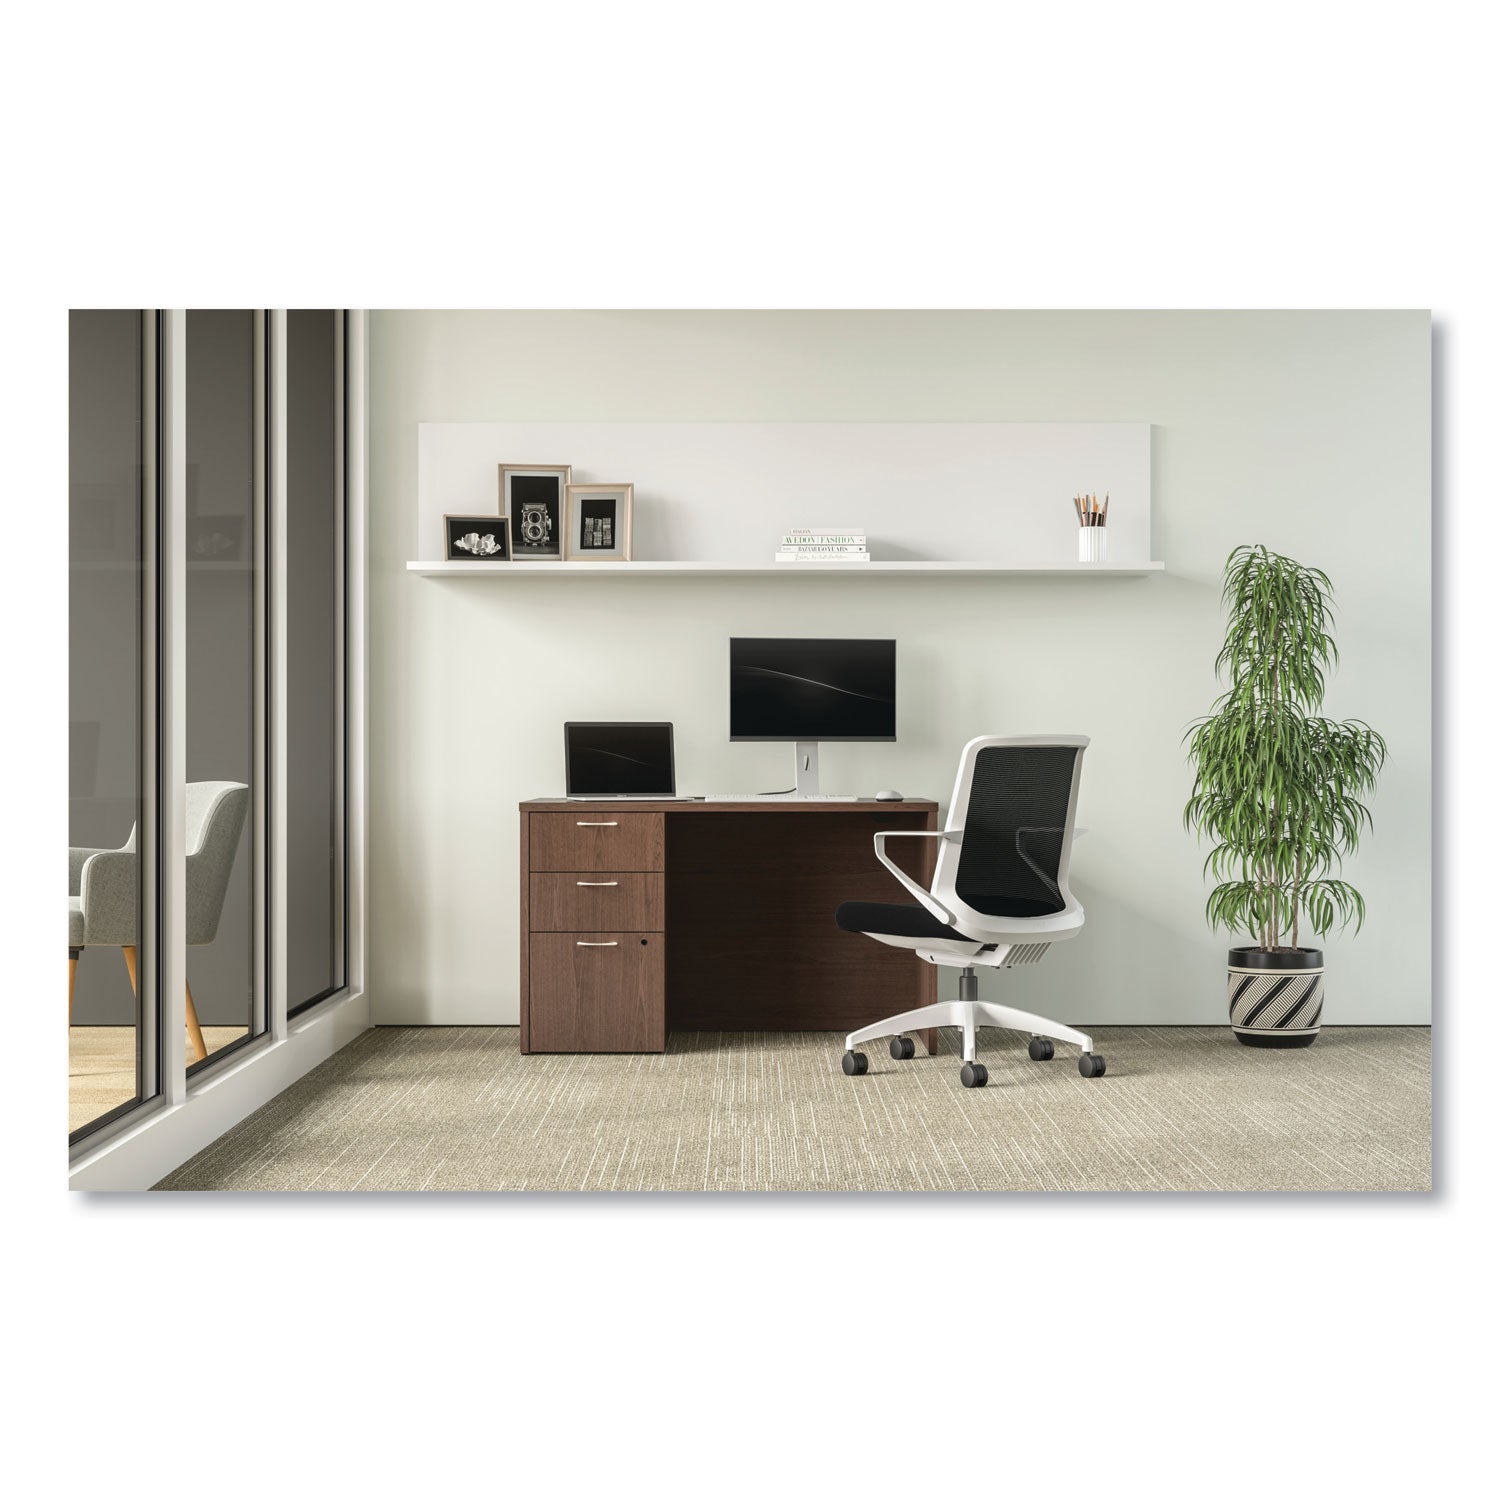 cliq-office-chair-supports-up-to-300-lb-17-to-22-seat-height-black-seat-back-white-base-ships-in-7-10-business-days_honclqimcu10dw - 3